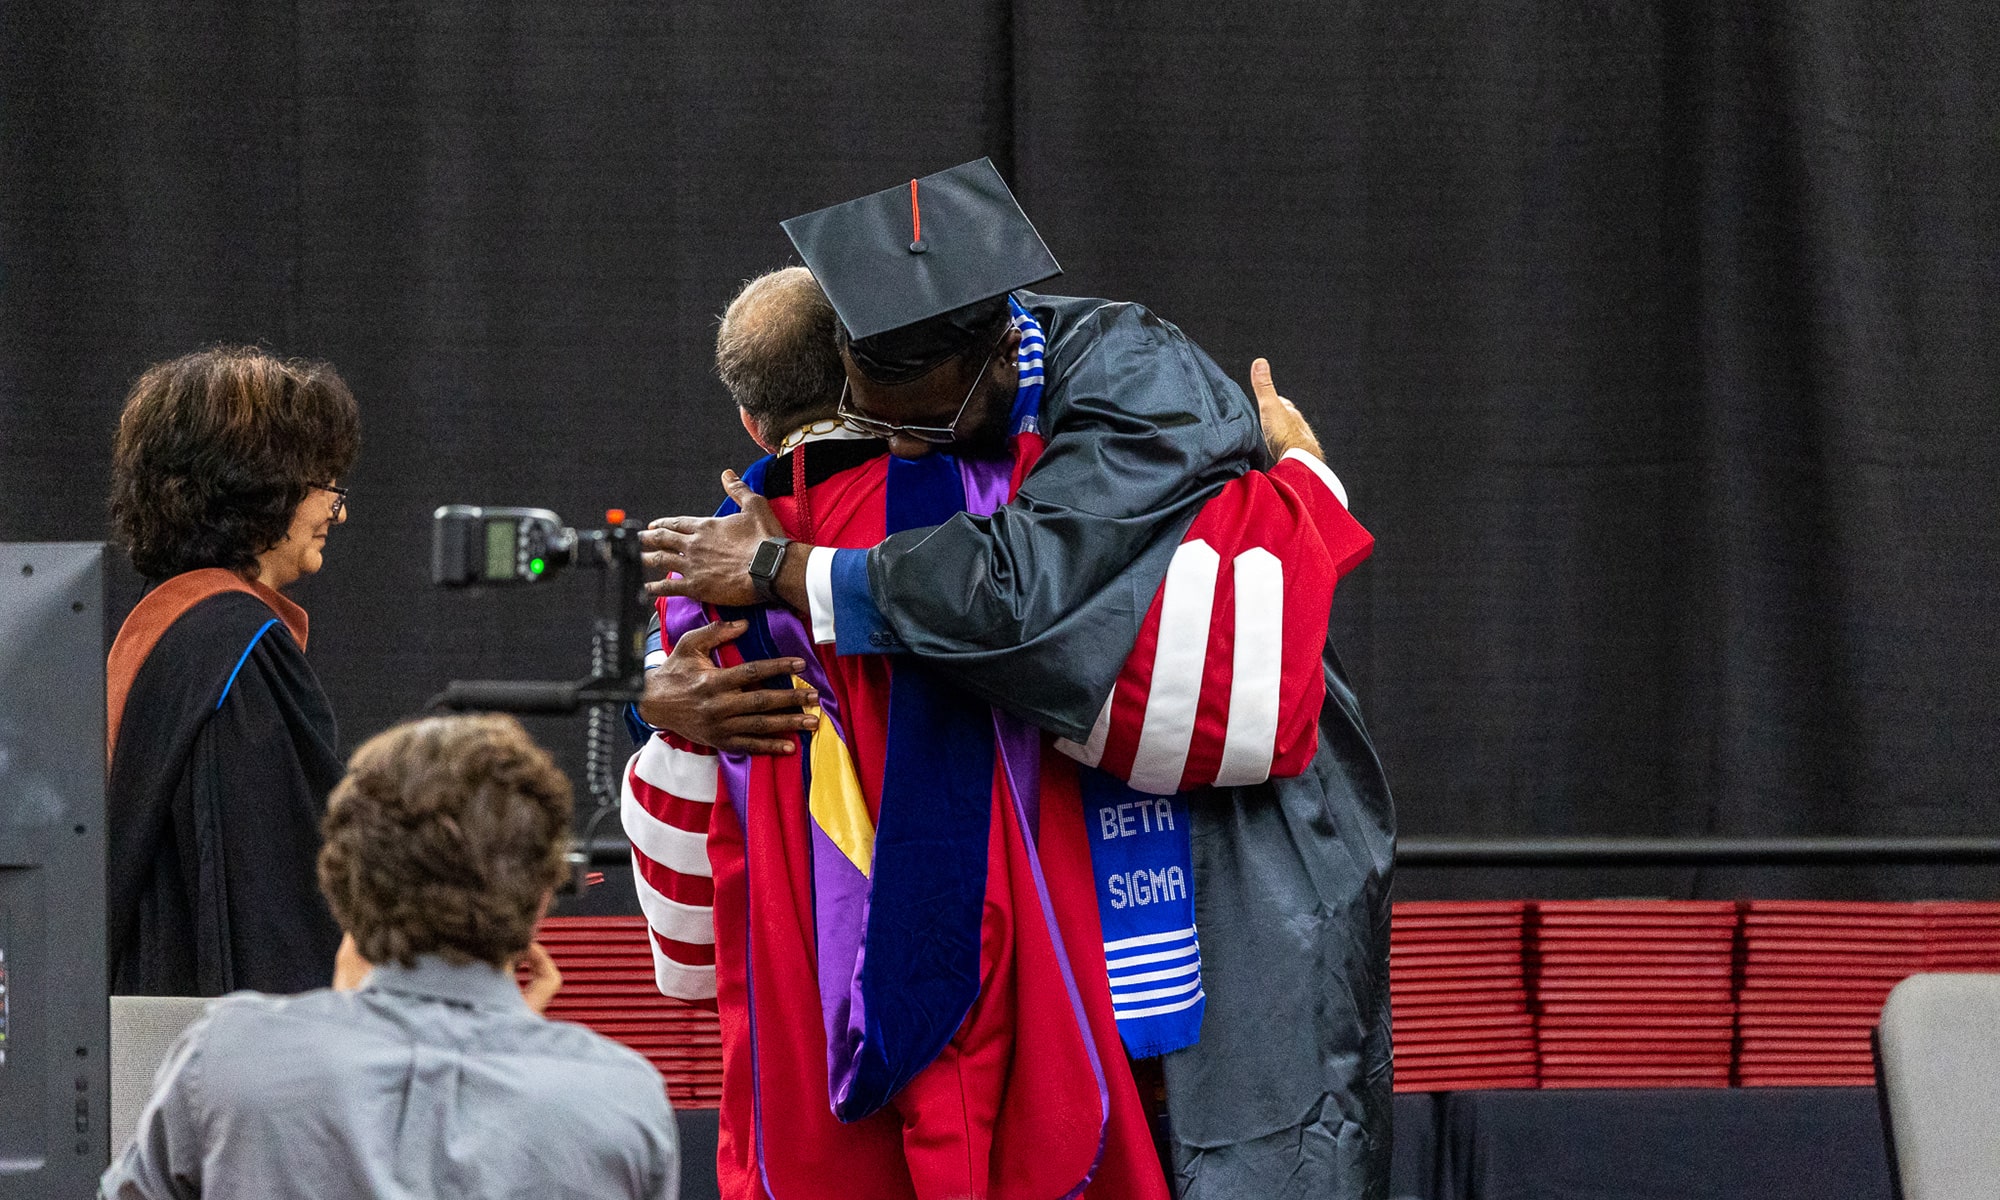 Kwaku Akuffo embraces President Weinberg after receiving his diploma